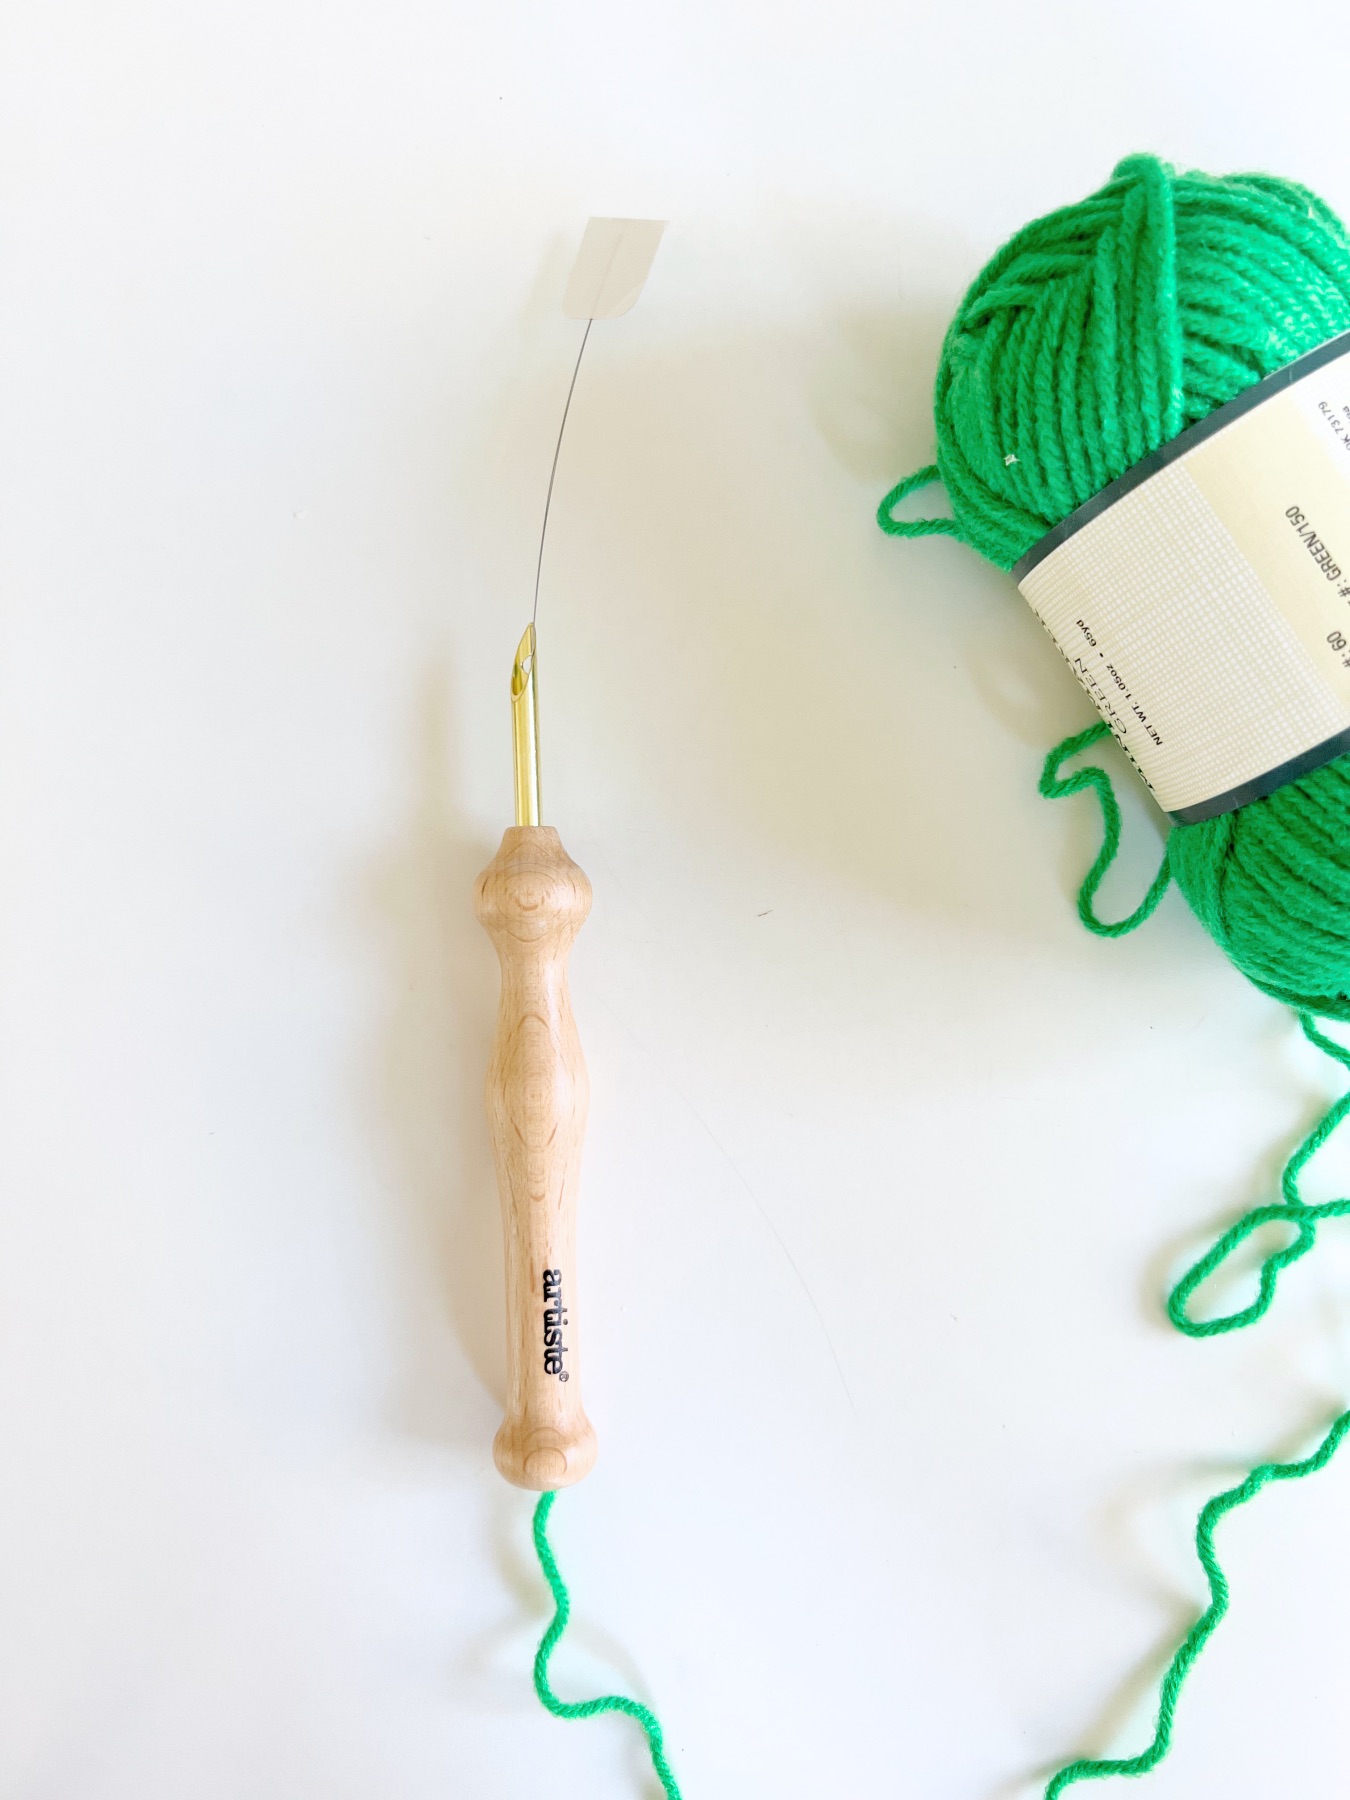 pull the yarn through the punch needle tool